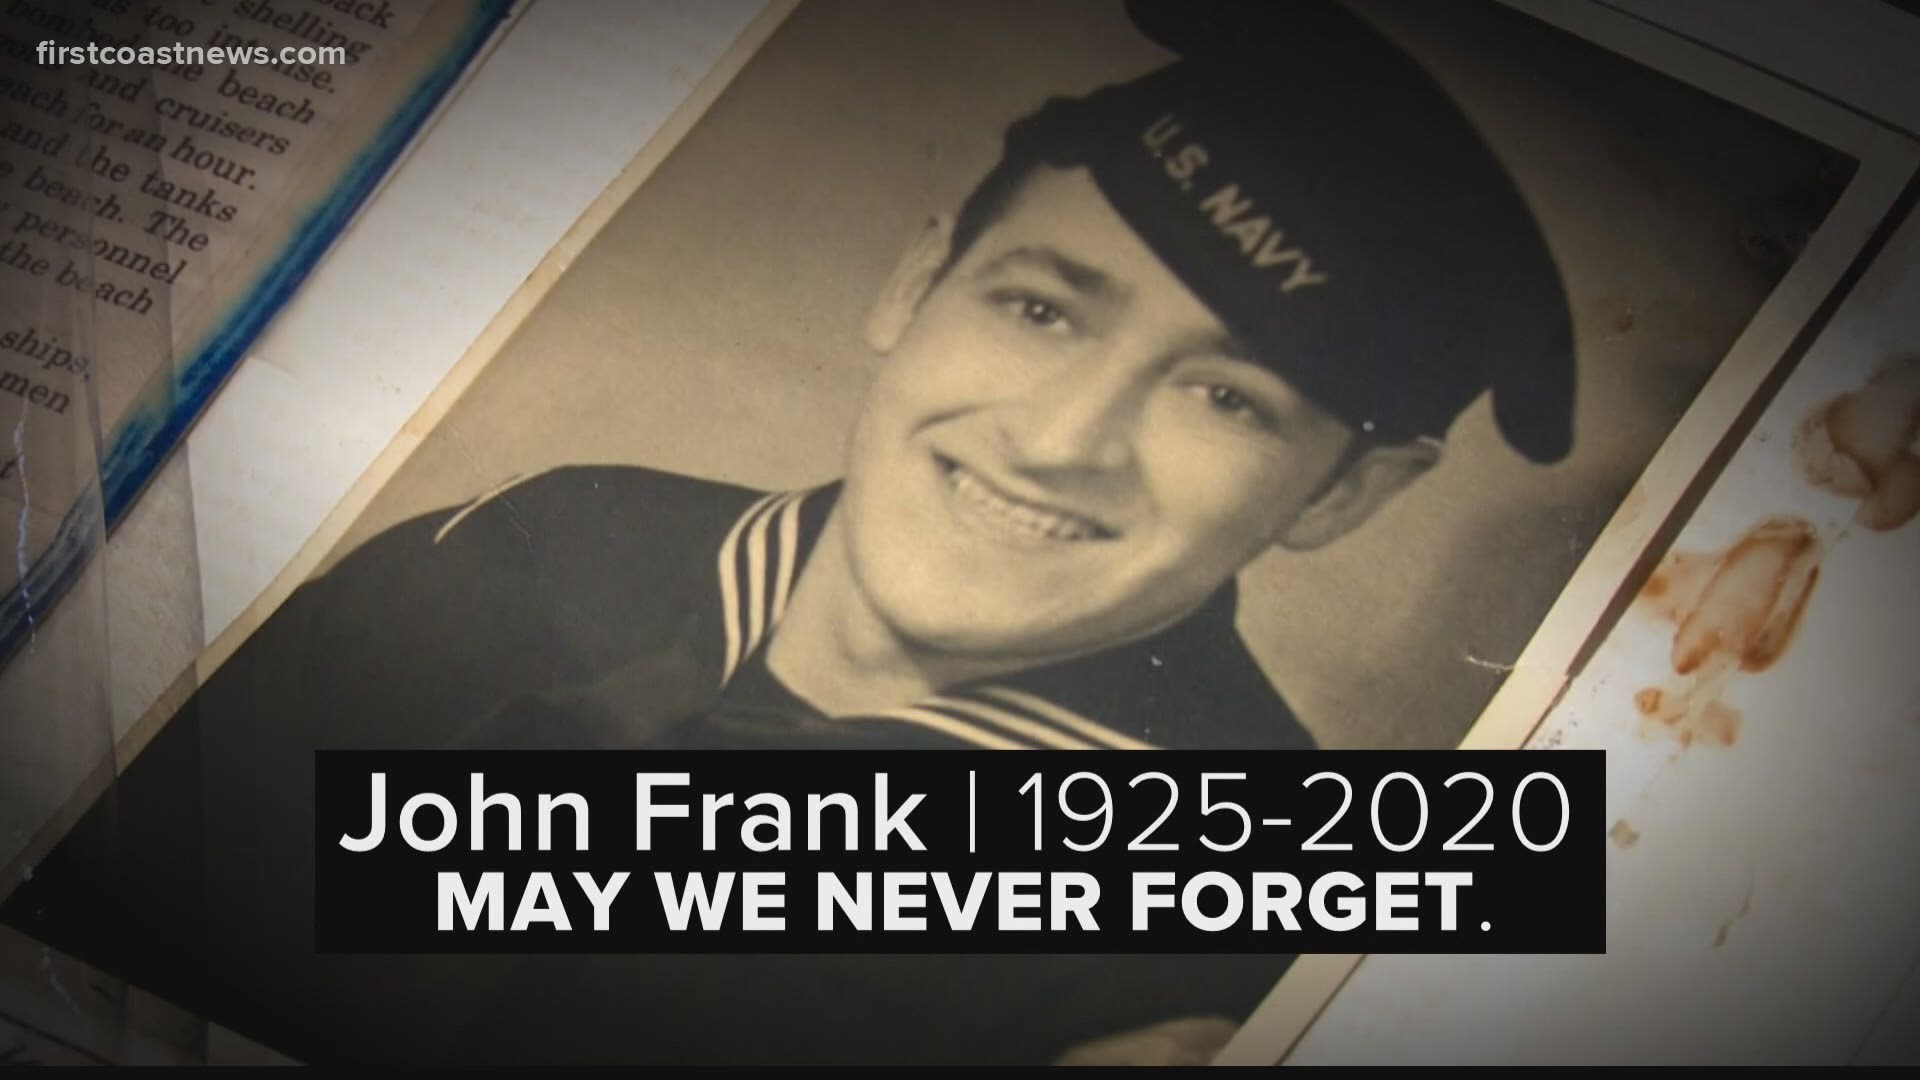 John Frank was just 19 years old when he went onto Omaha Beach for an assignment most of us could never handle.